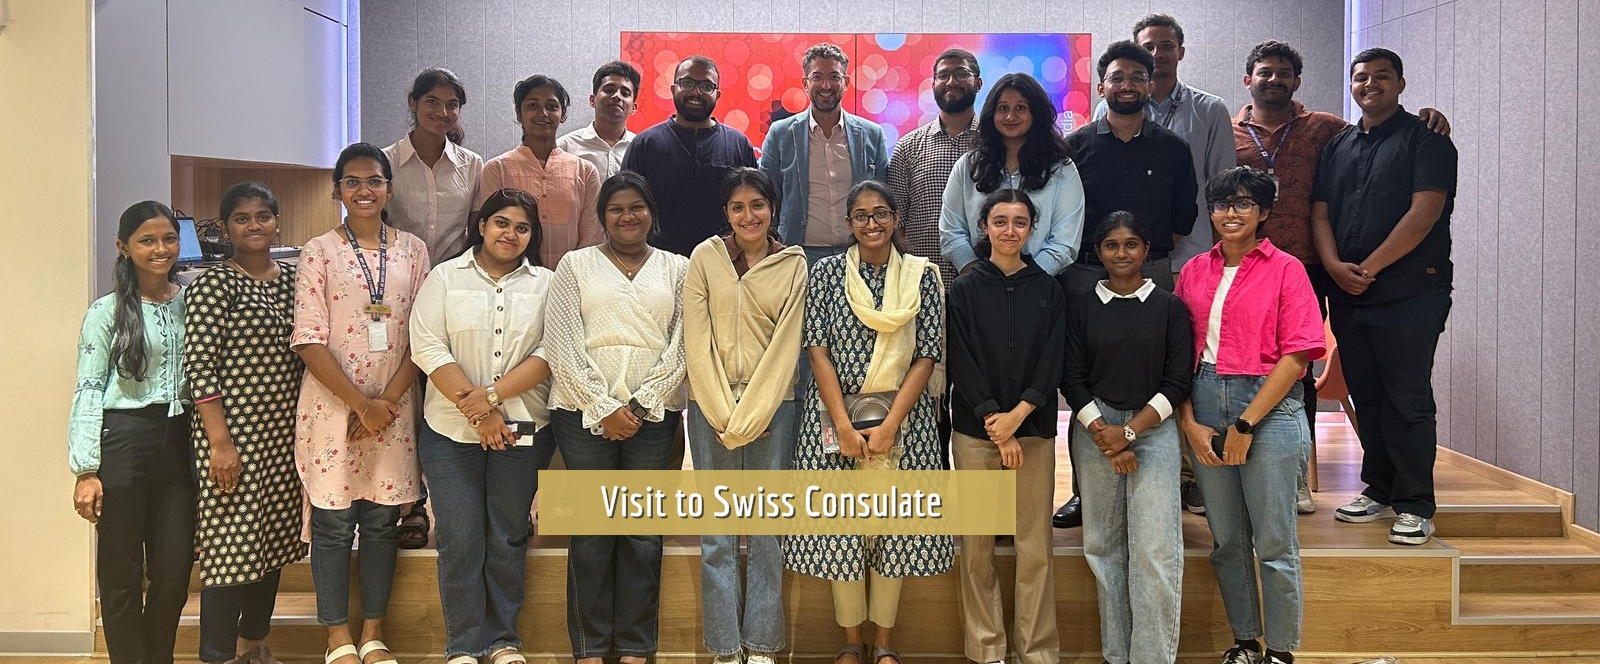 Visit to Swiss Consulate